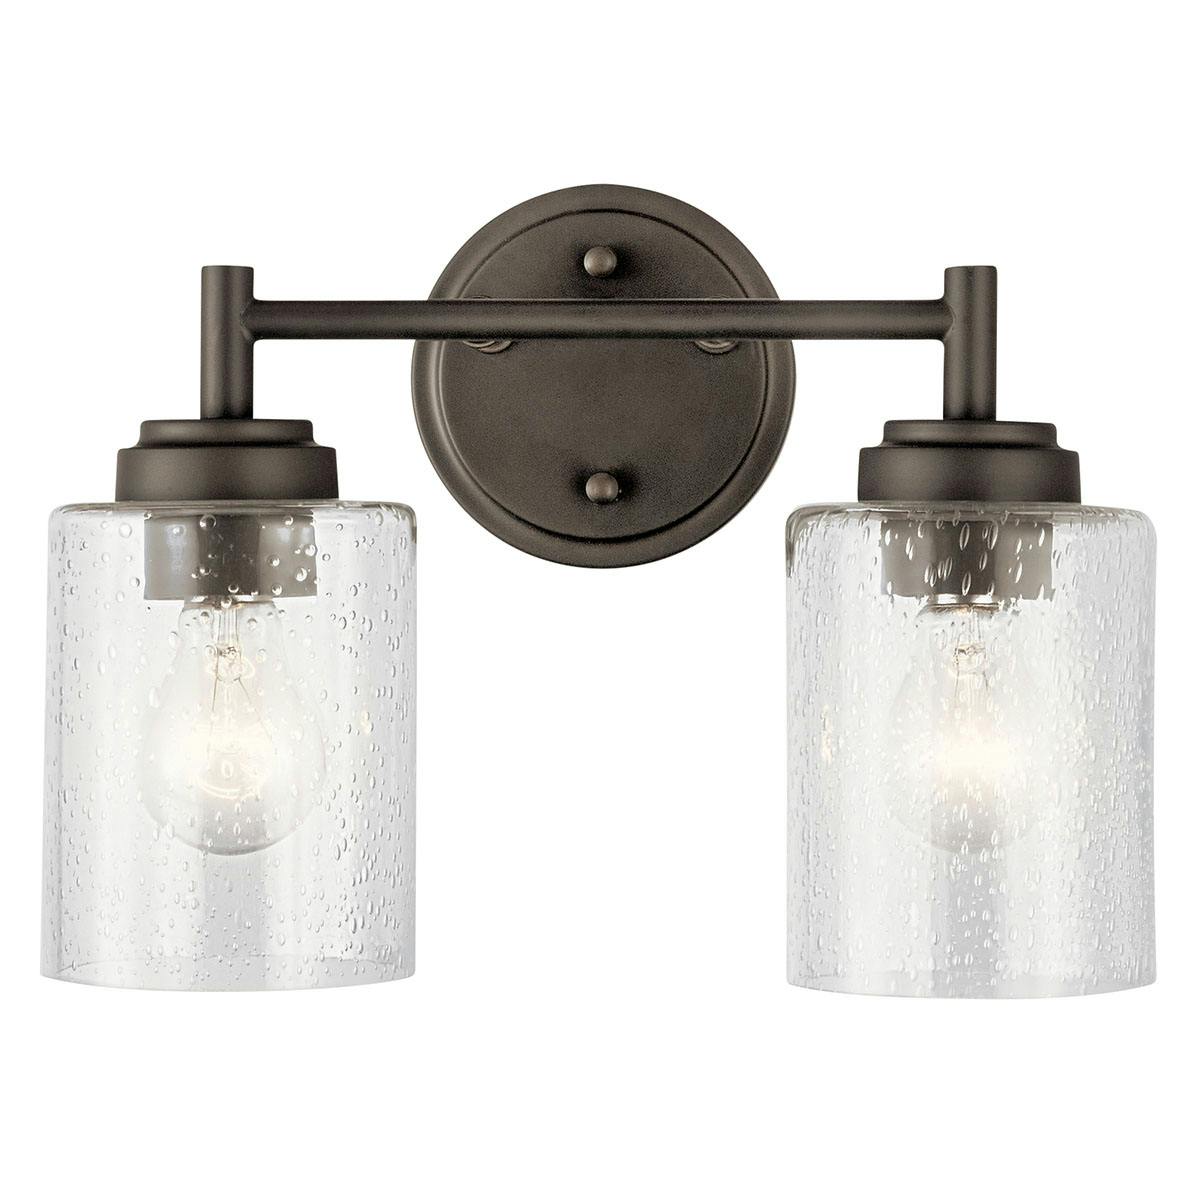 The Winslow 12.75" Vanity Light Olde Bronze facing down on a white background